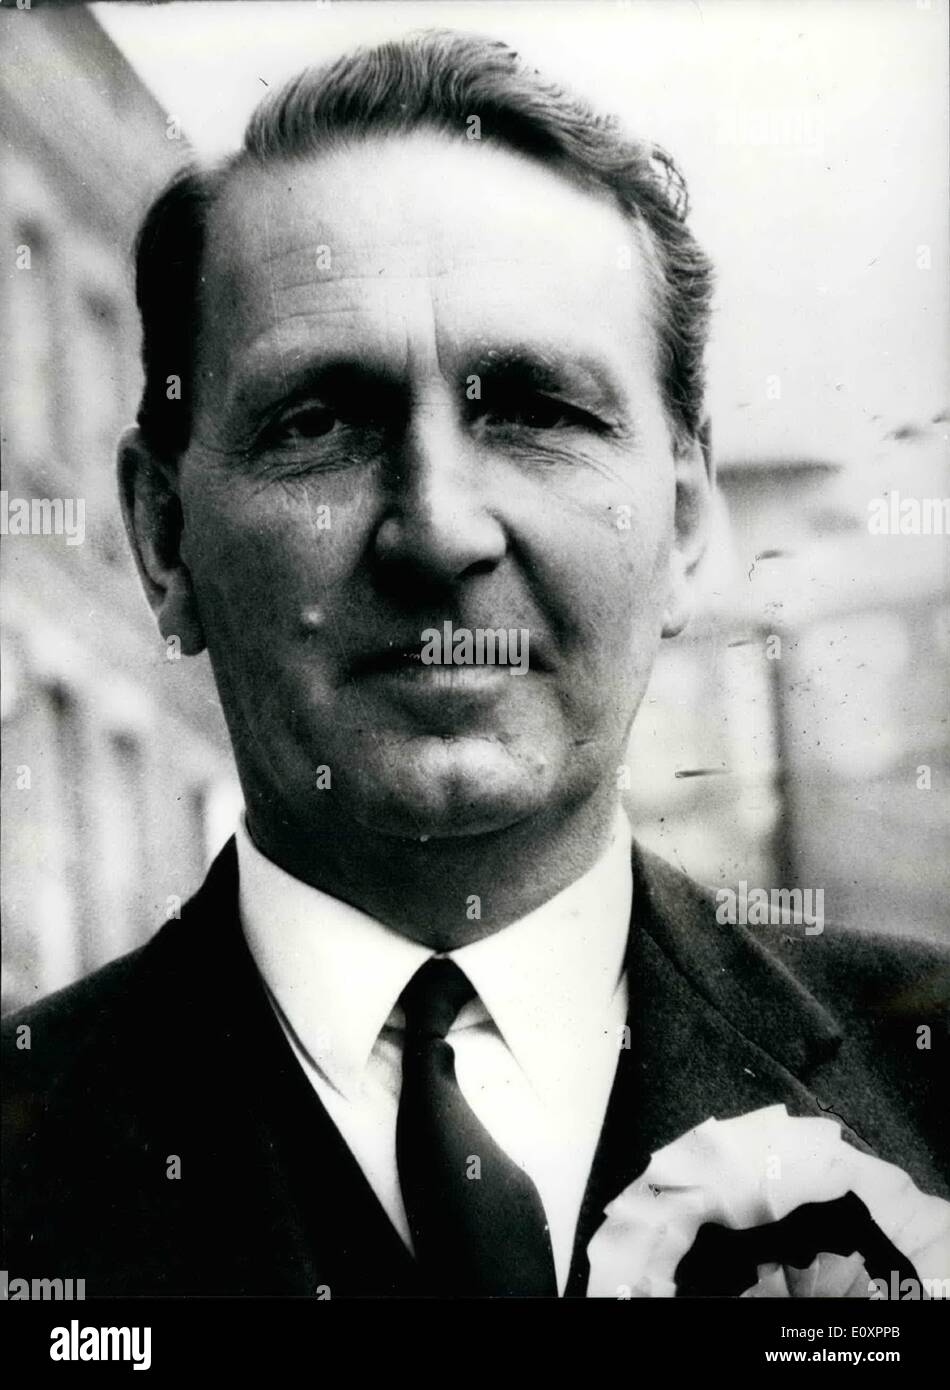 Oct. 10, 1967 - London MP Found dead in Gas-filled room - Acton Labour MP, Mr. Bernard Frances Castle Floud, was found dead today in a gas-filled room of his home in Albert Street, Regent's Park. Mr. Floud, who was 52, and a Granada TV executive, based in London, had been MP for Acton since 1964. His wife, Ailsa, died in January after a long illness. Today's discovery was made by his son, Roderick, who said later: ''My father had been ill for some months after the death of my mother.'' Photo Shows- Mr. Bernard Francis Castle Floud who was found dead today. Stock Photo